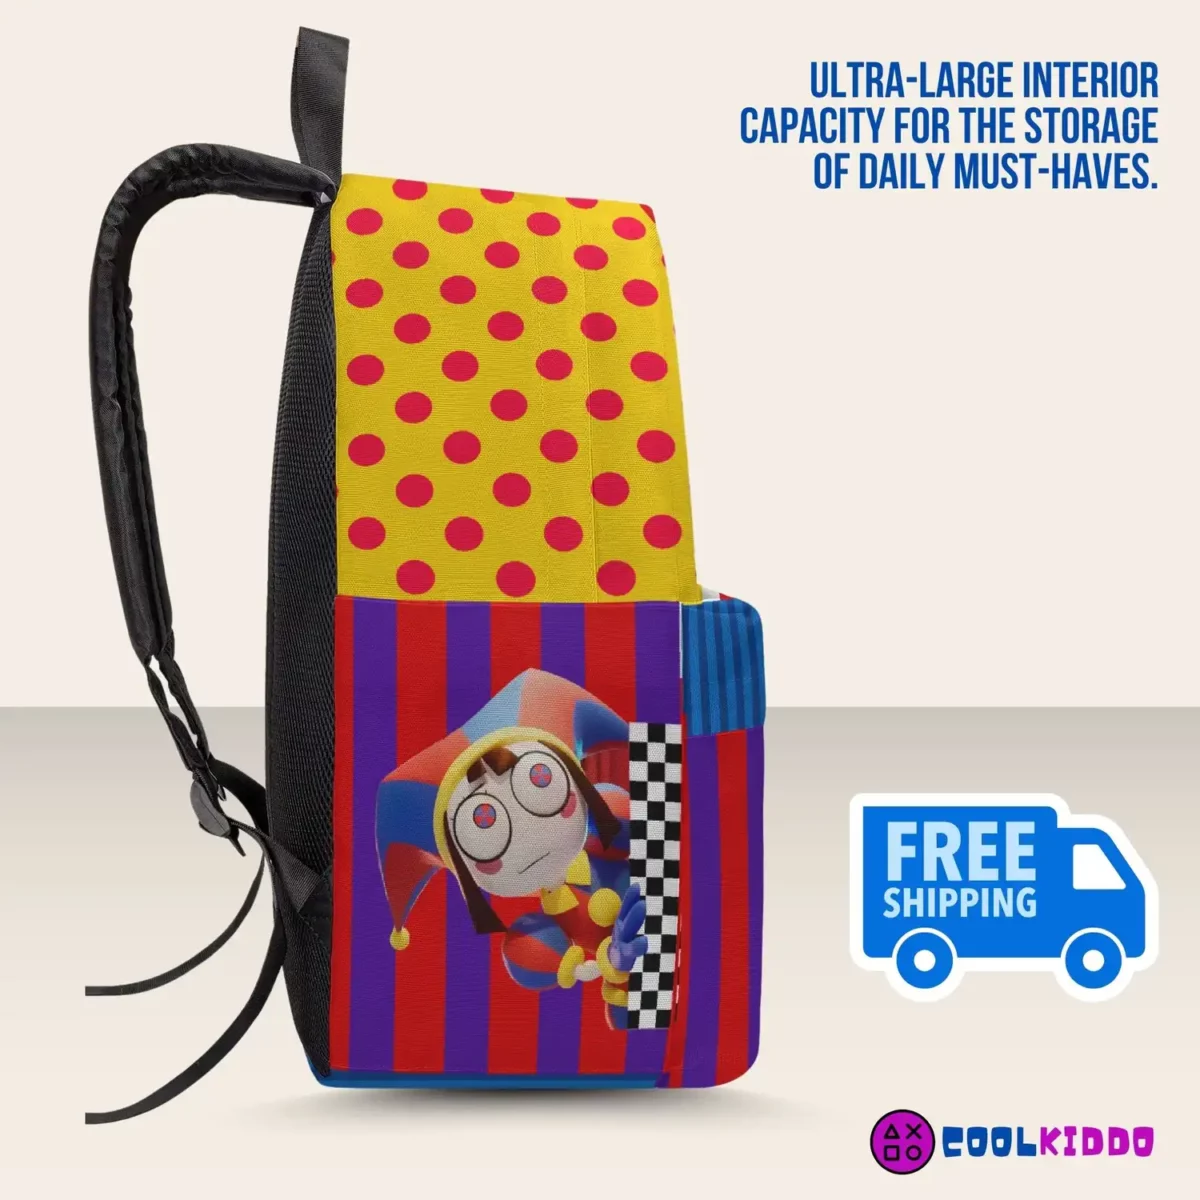 Amazing Digital Circus All-Over-Print Canvas Backpack for kids. Three Sizes School bag Cool Kiddo 22